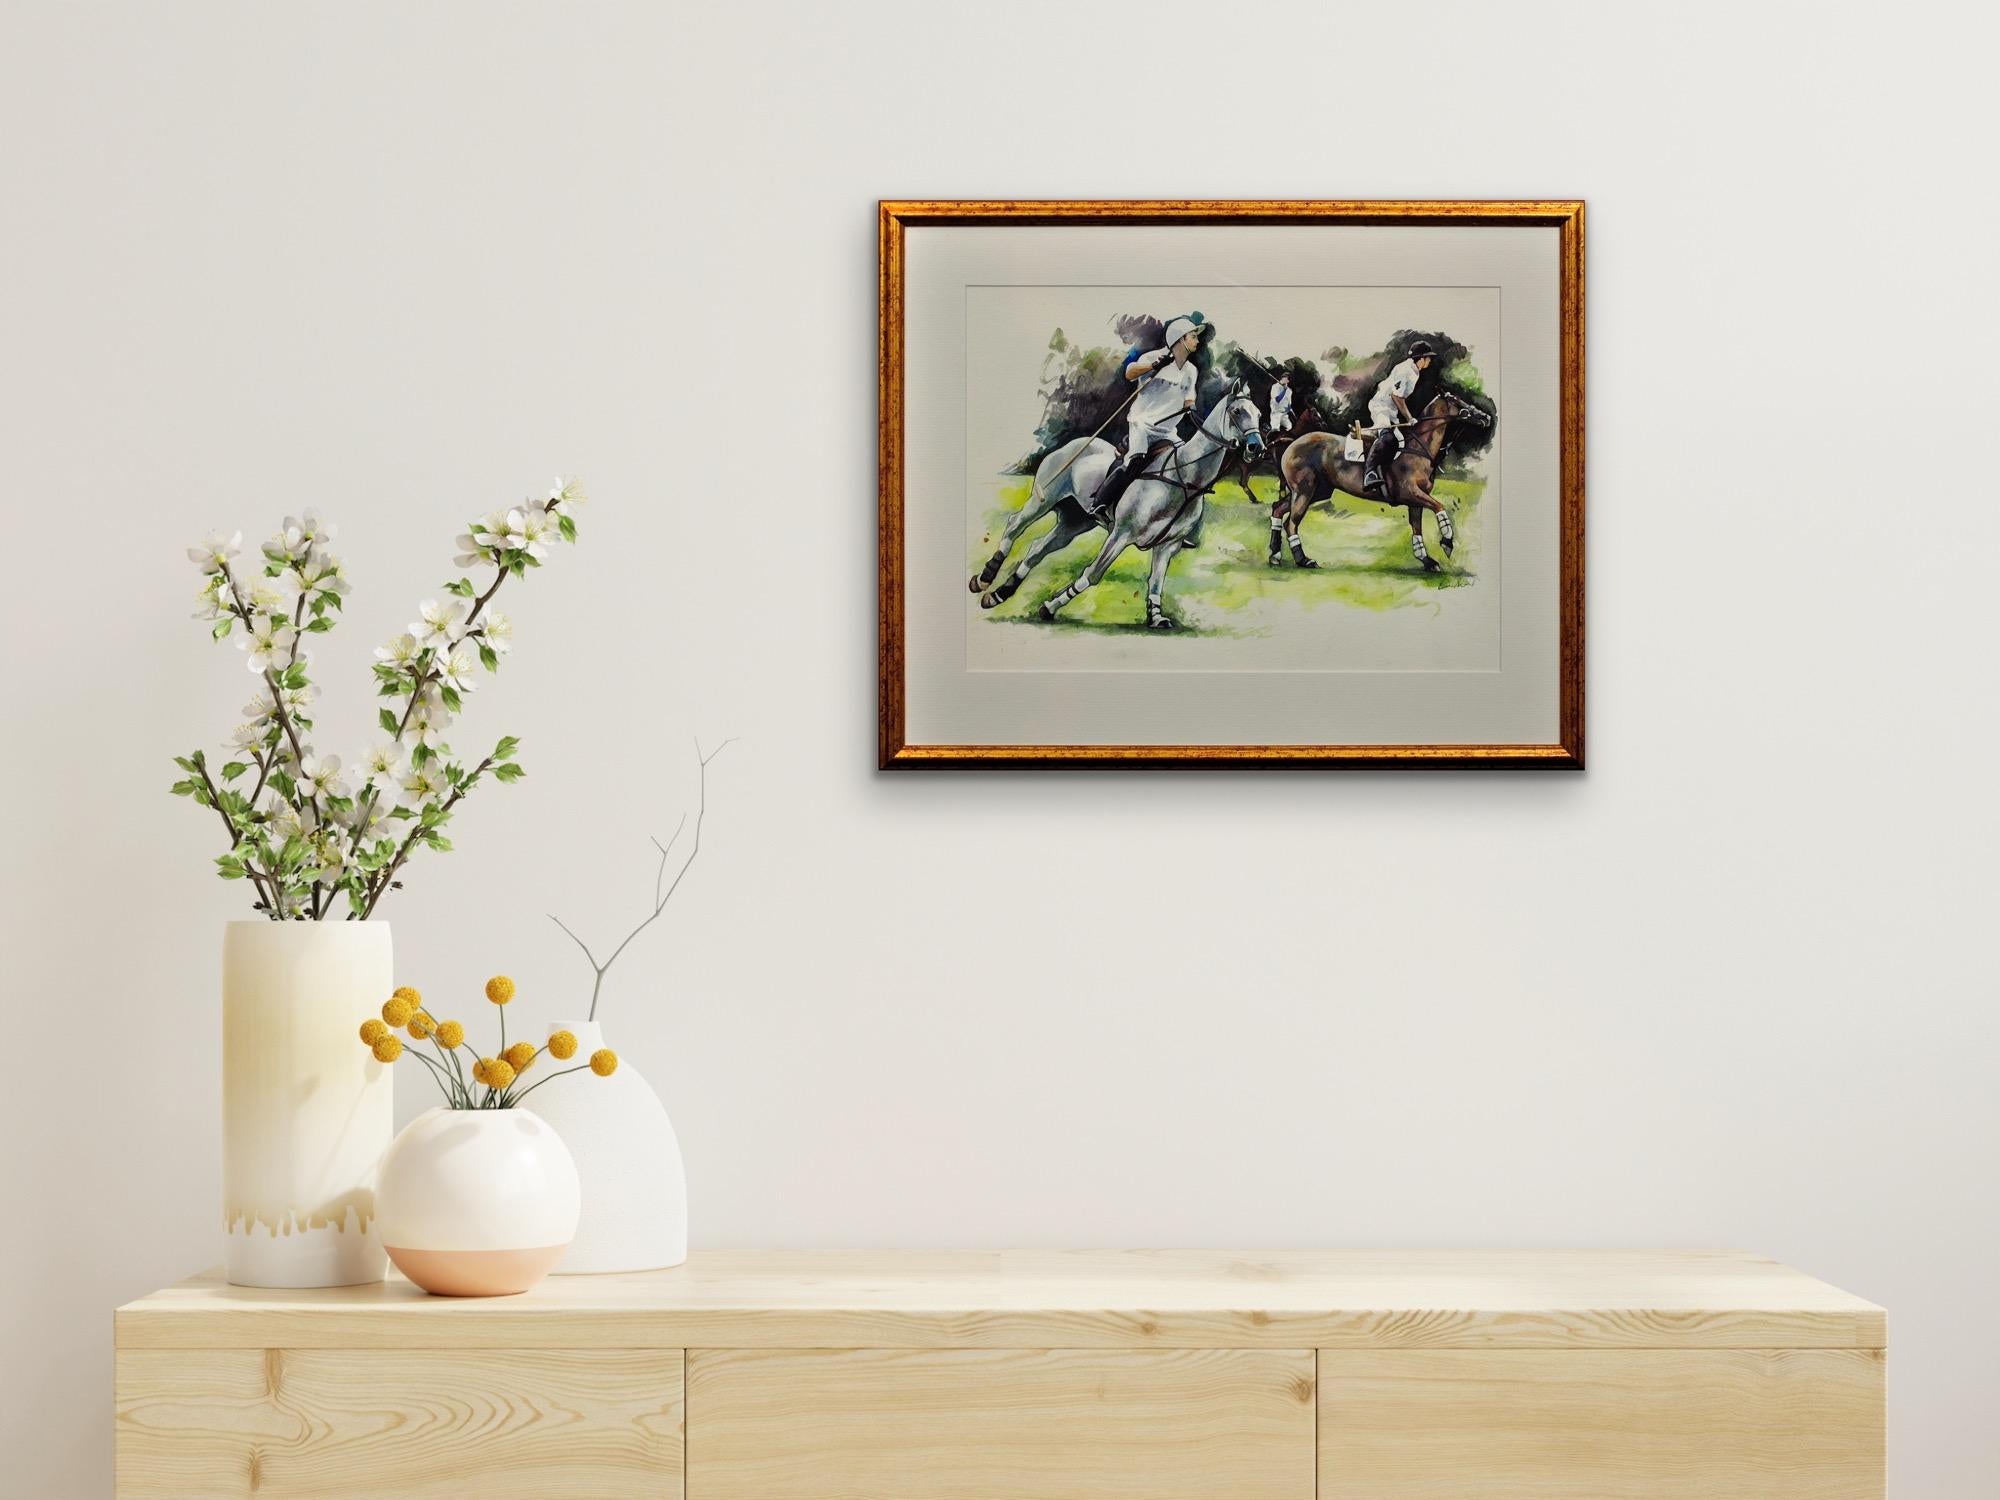 Polo Match, Cirencester, The First Chukka. Cotswolds. Parkland.Framed Watercolor For Sale 6